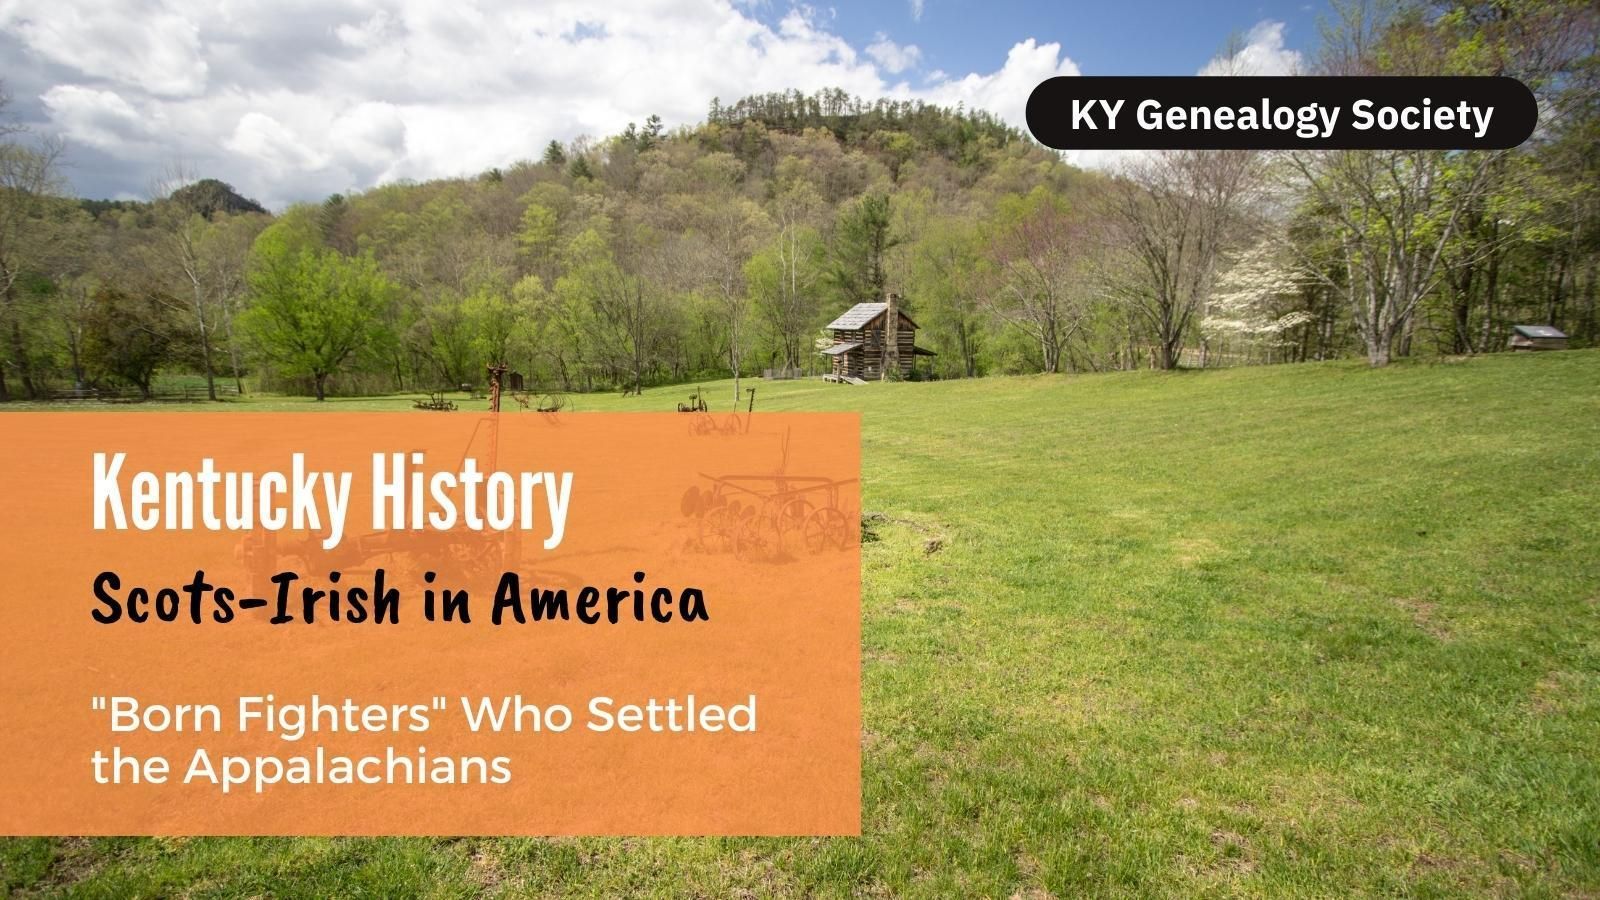 Scots-Irish: Brief History of the Born Fighters Who Settled the Appalachians